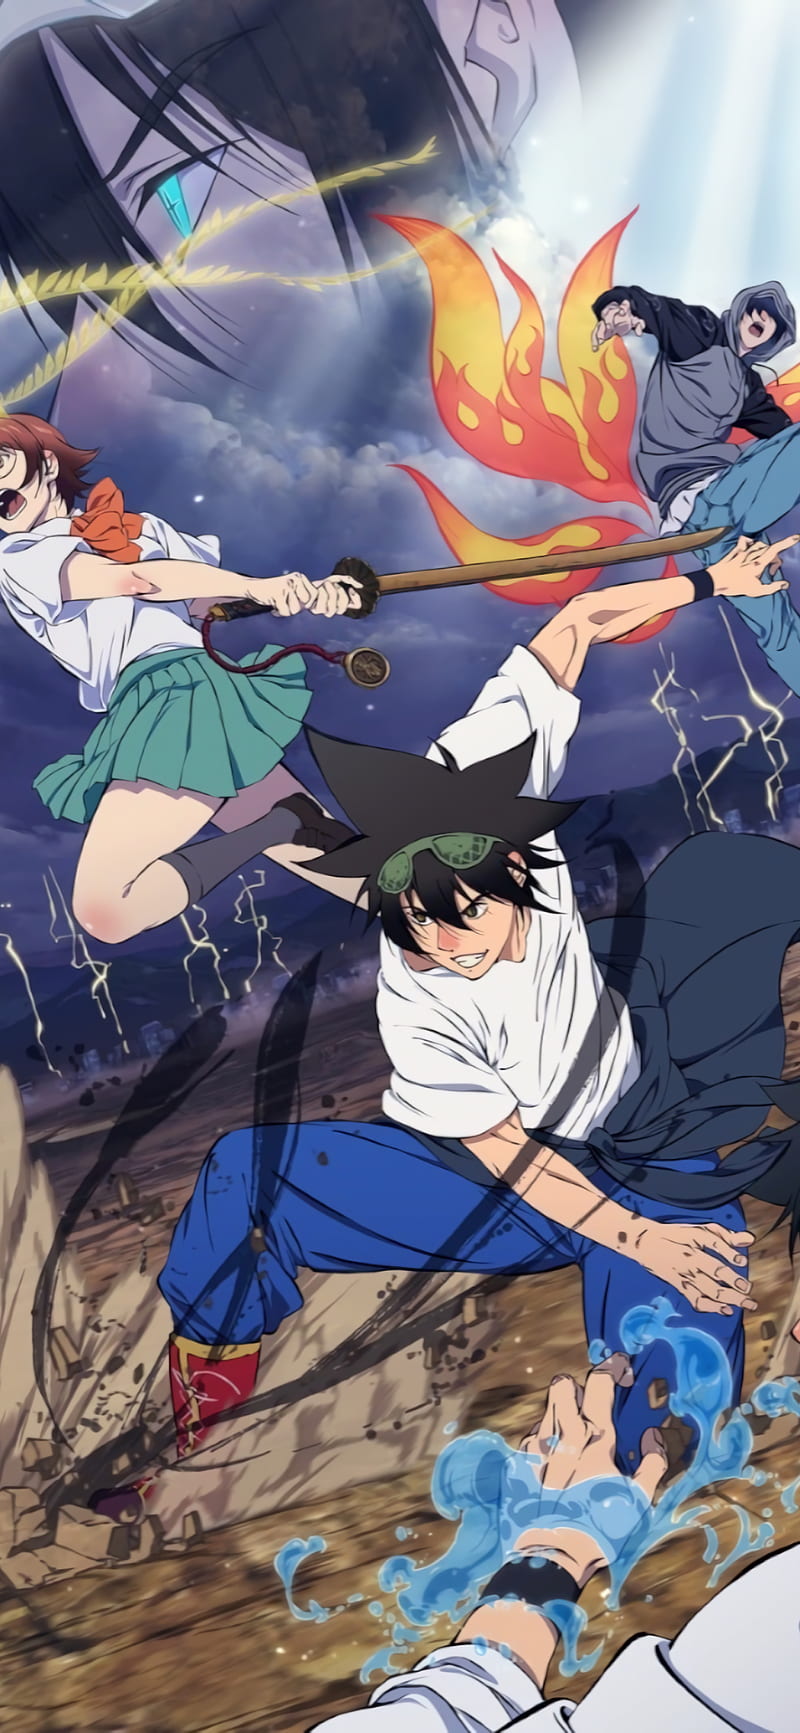 50 Best Fighting Anime You Need to Check Out in 2023